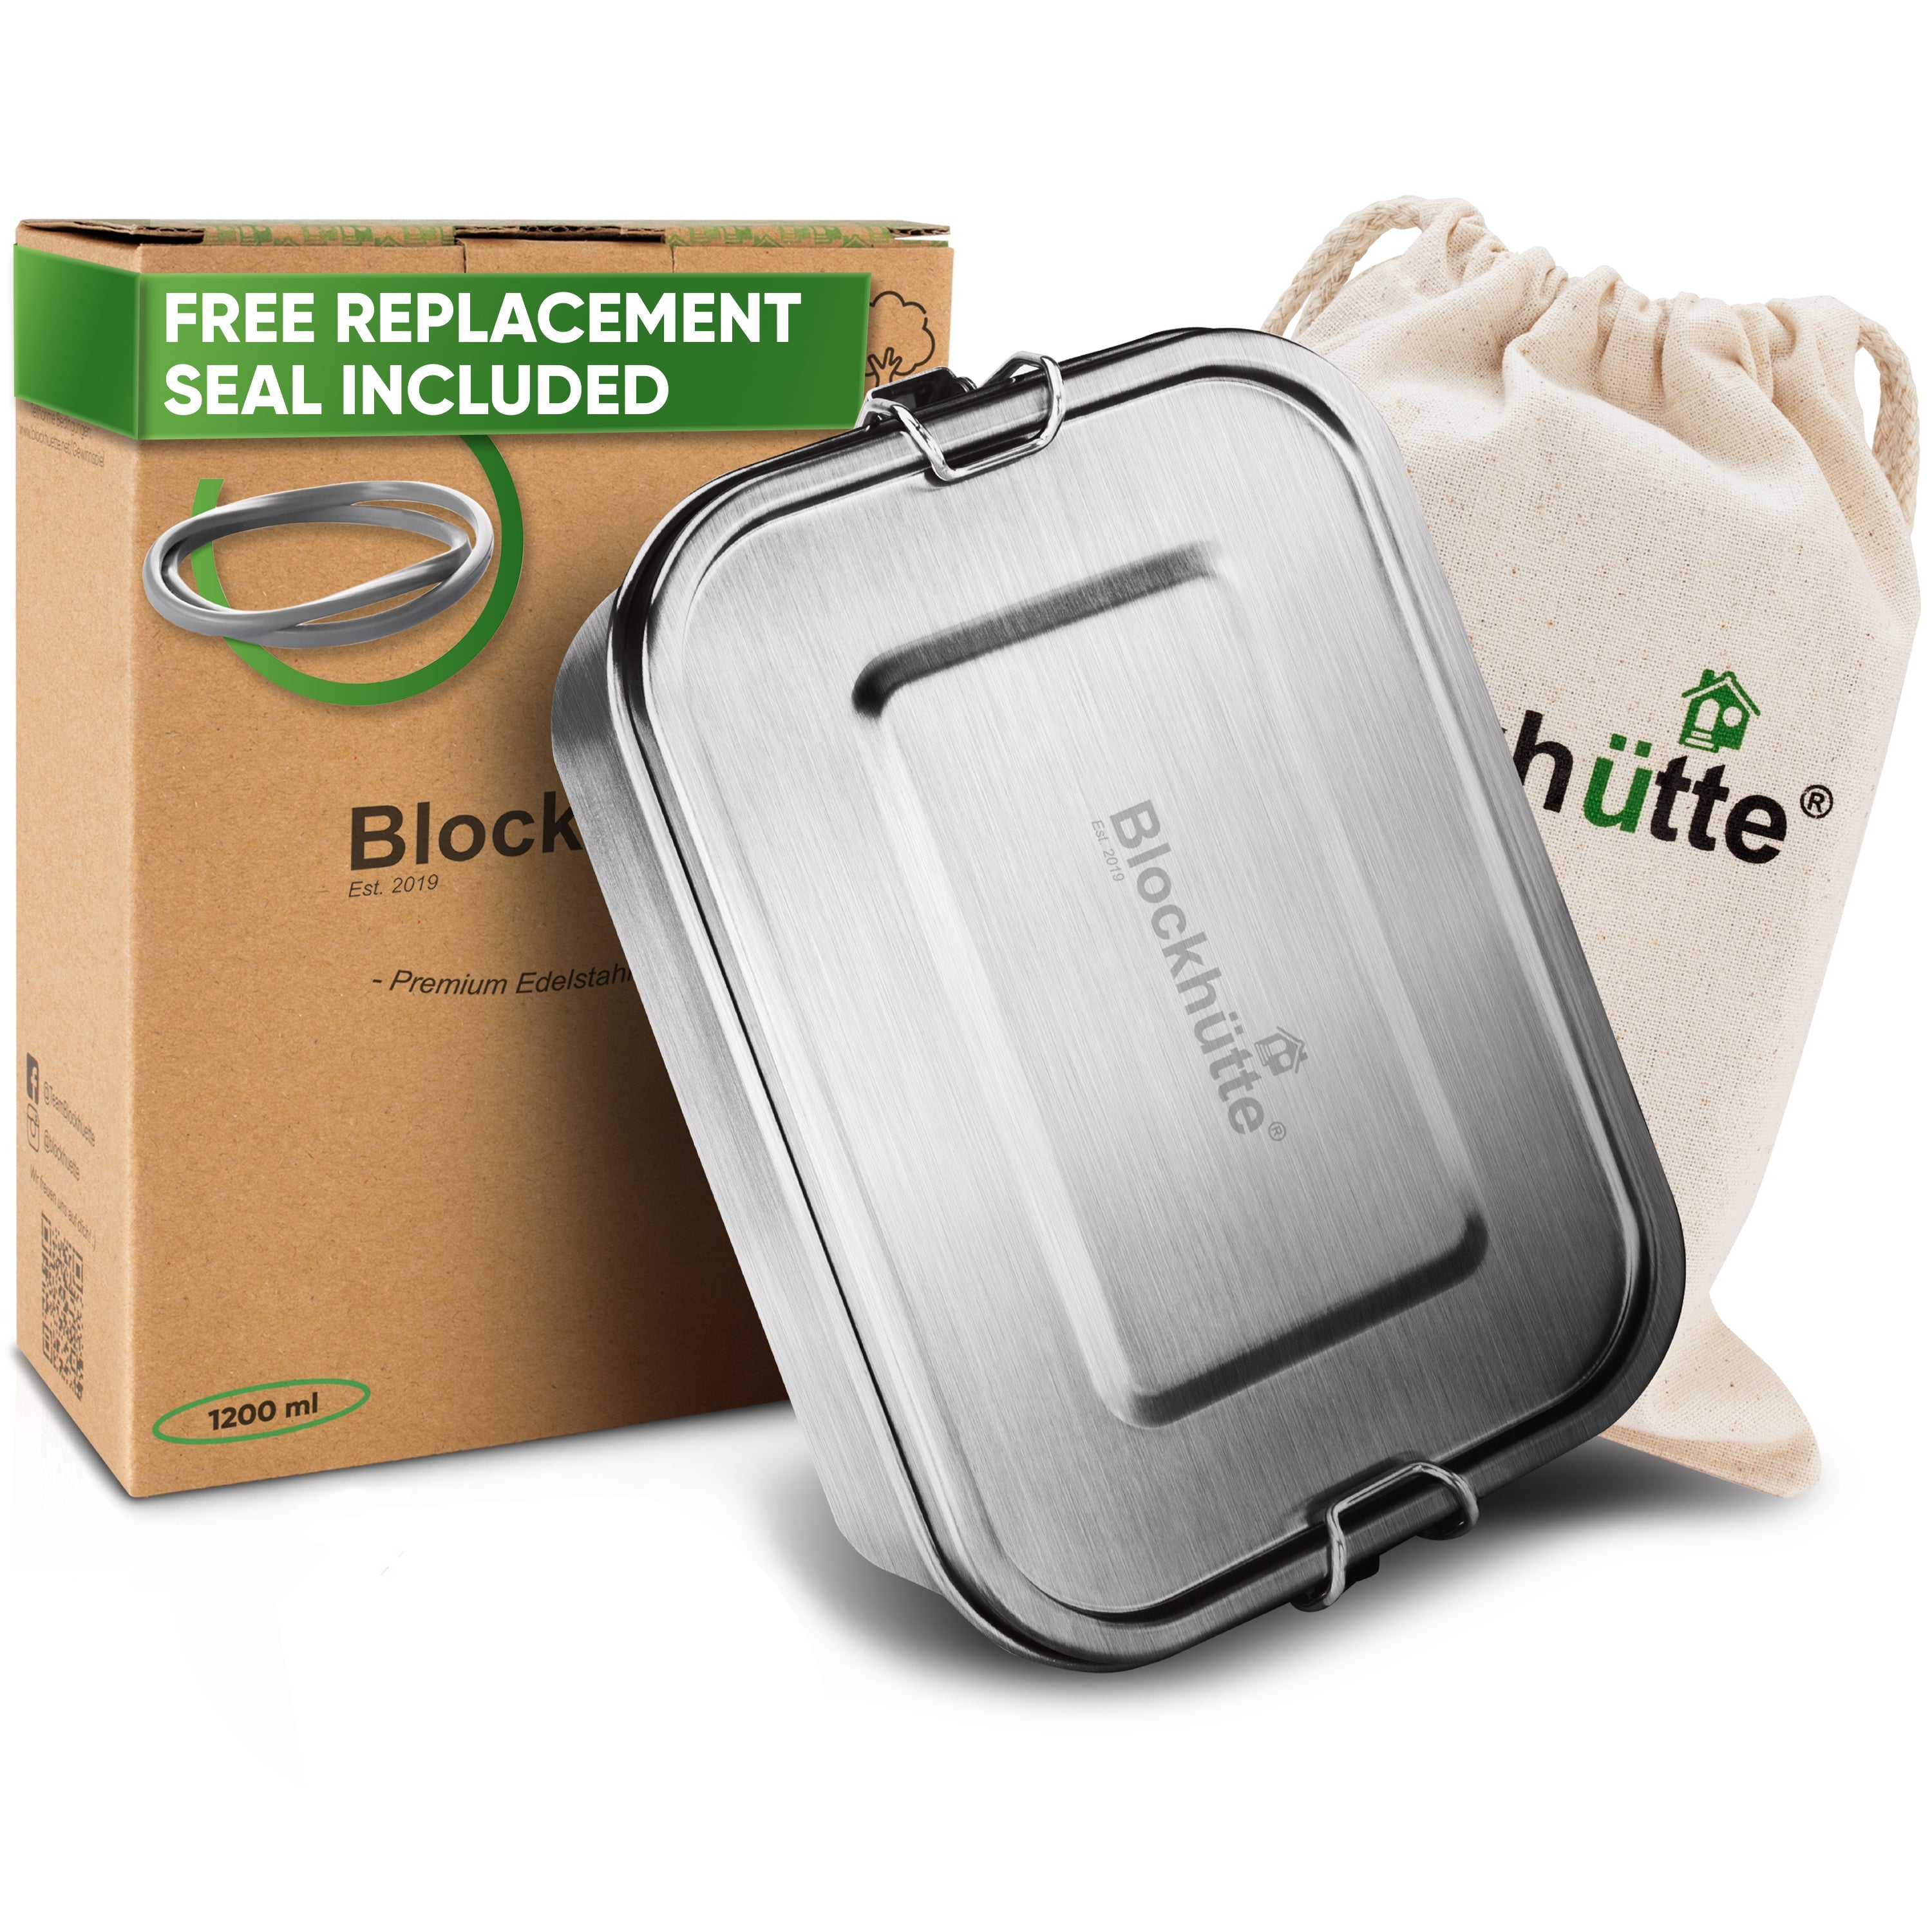 Benefits of Using a Reusable Leak-proof Lunch Box